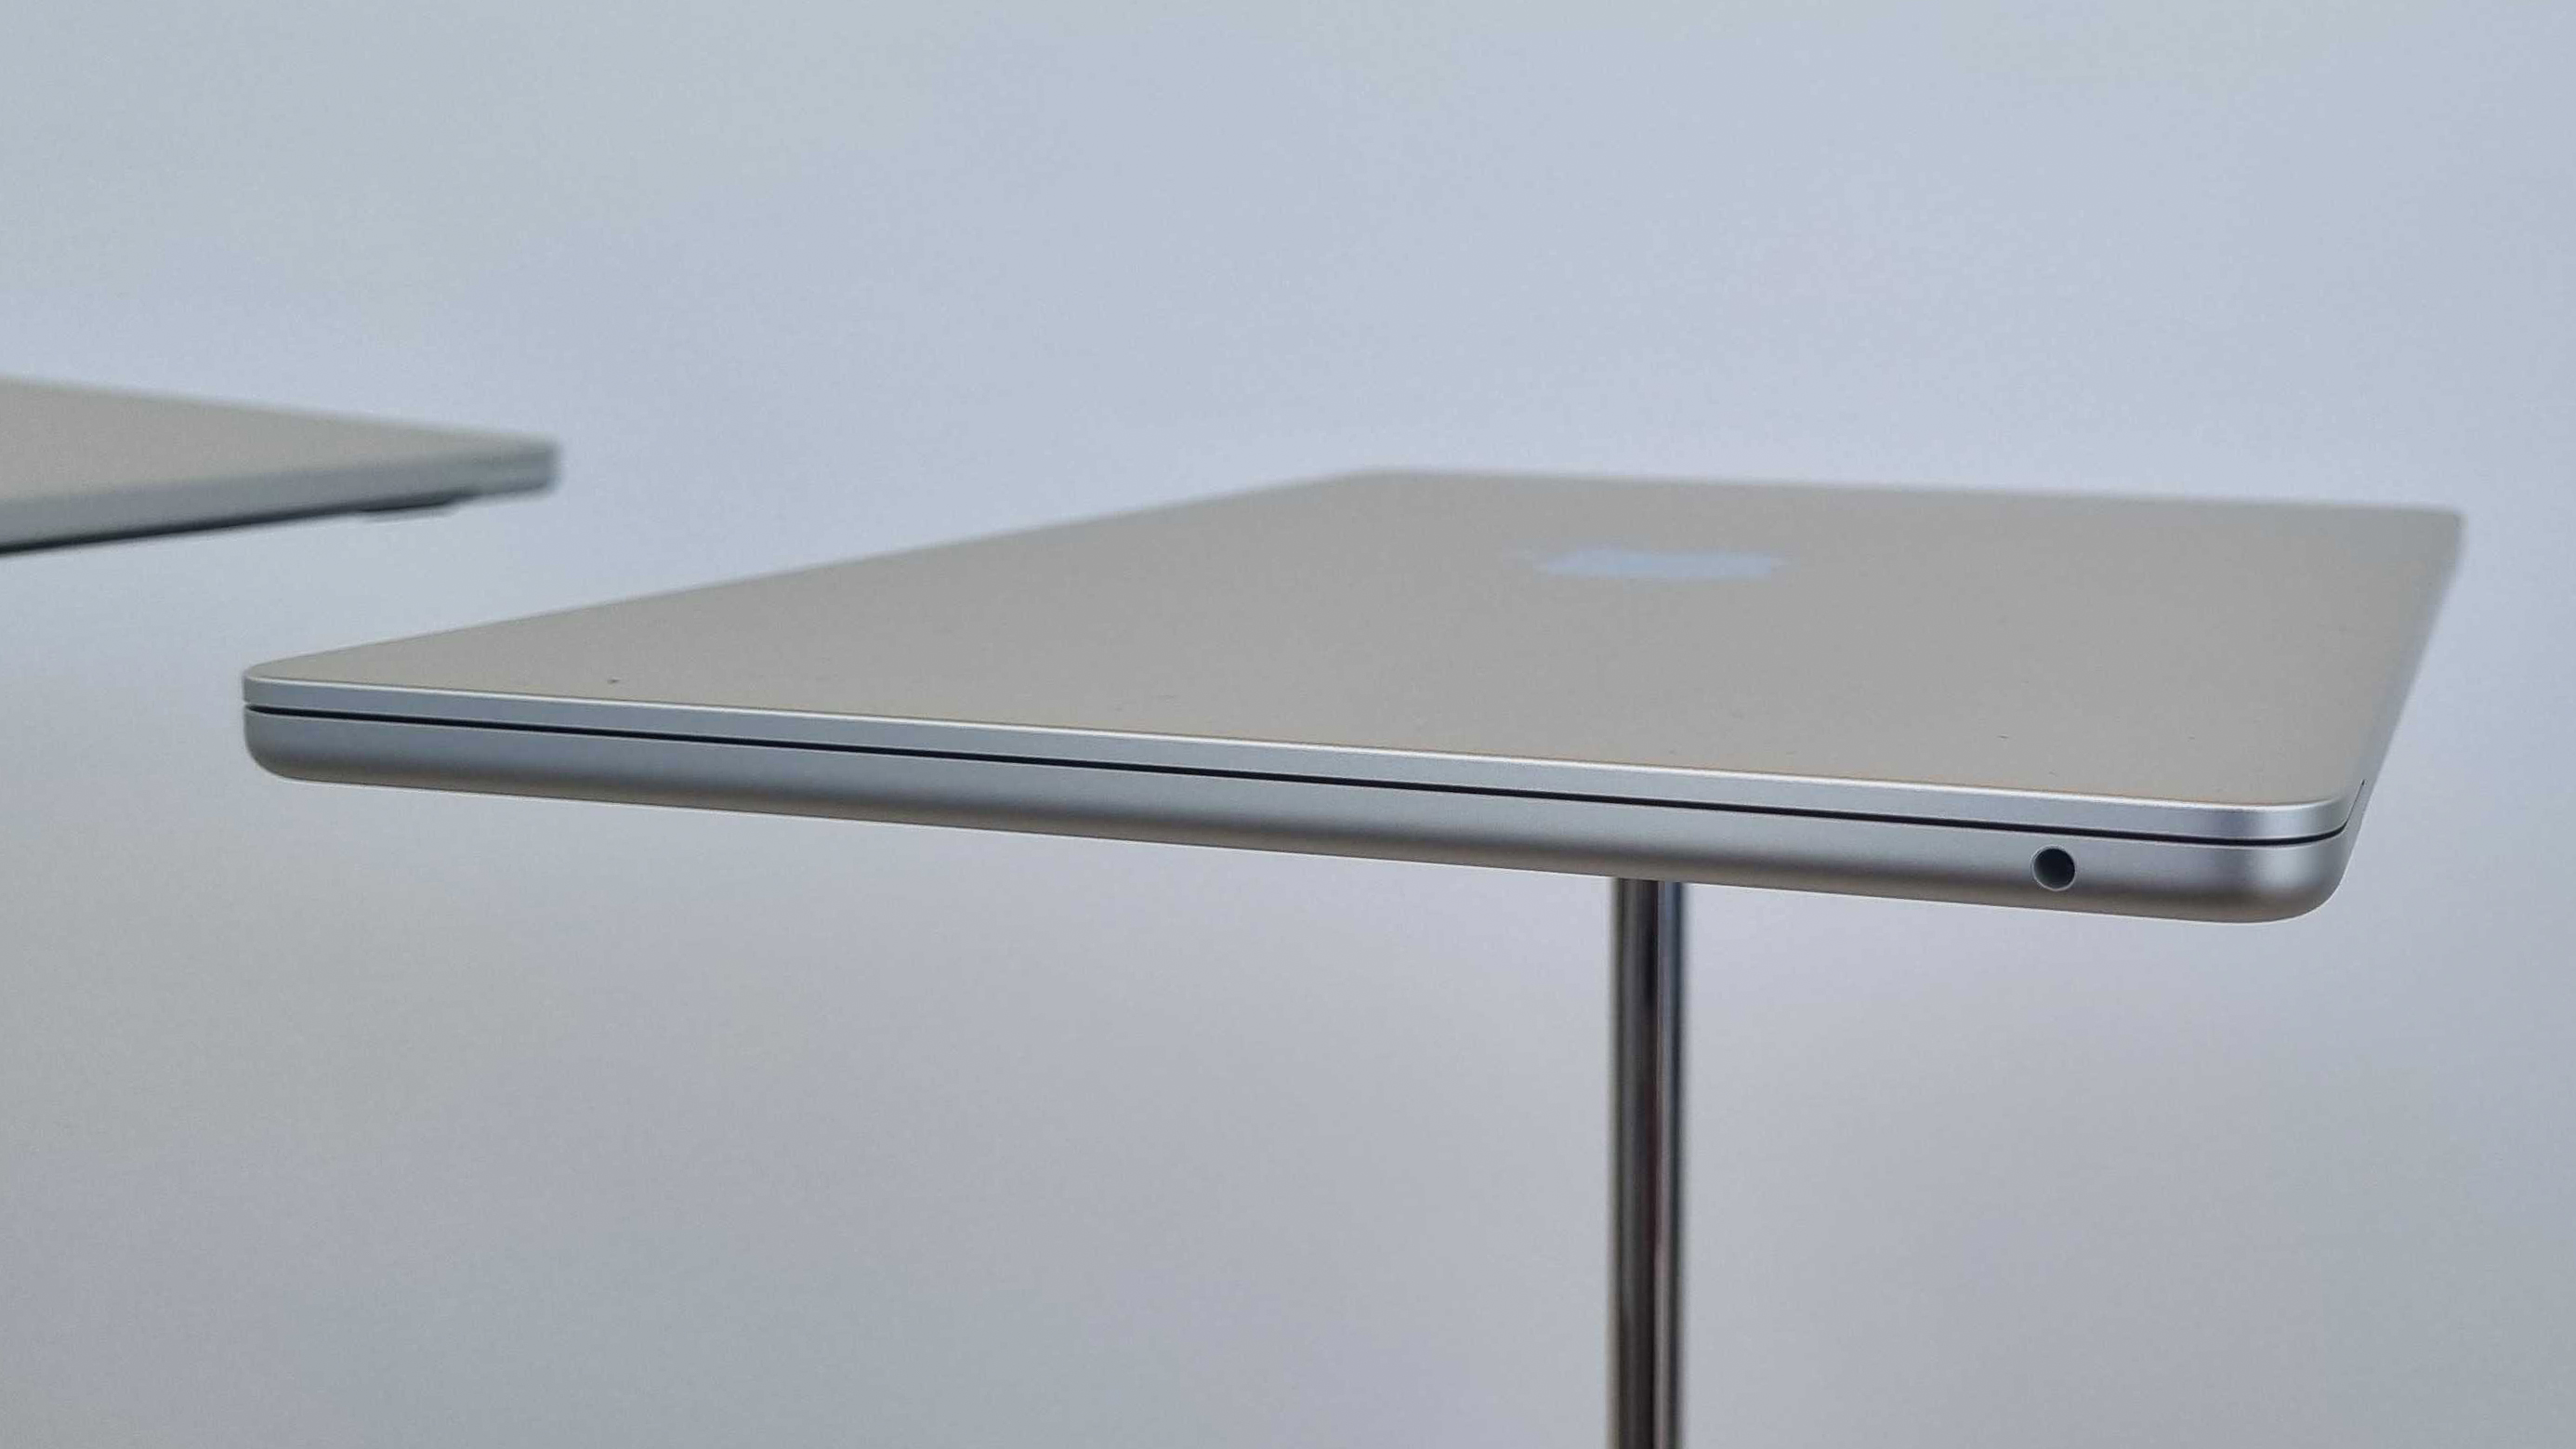 The Apple MacBook Air 2022 laptop on a stand